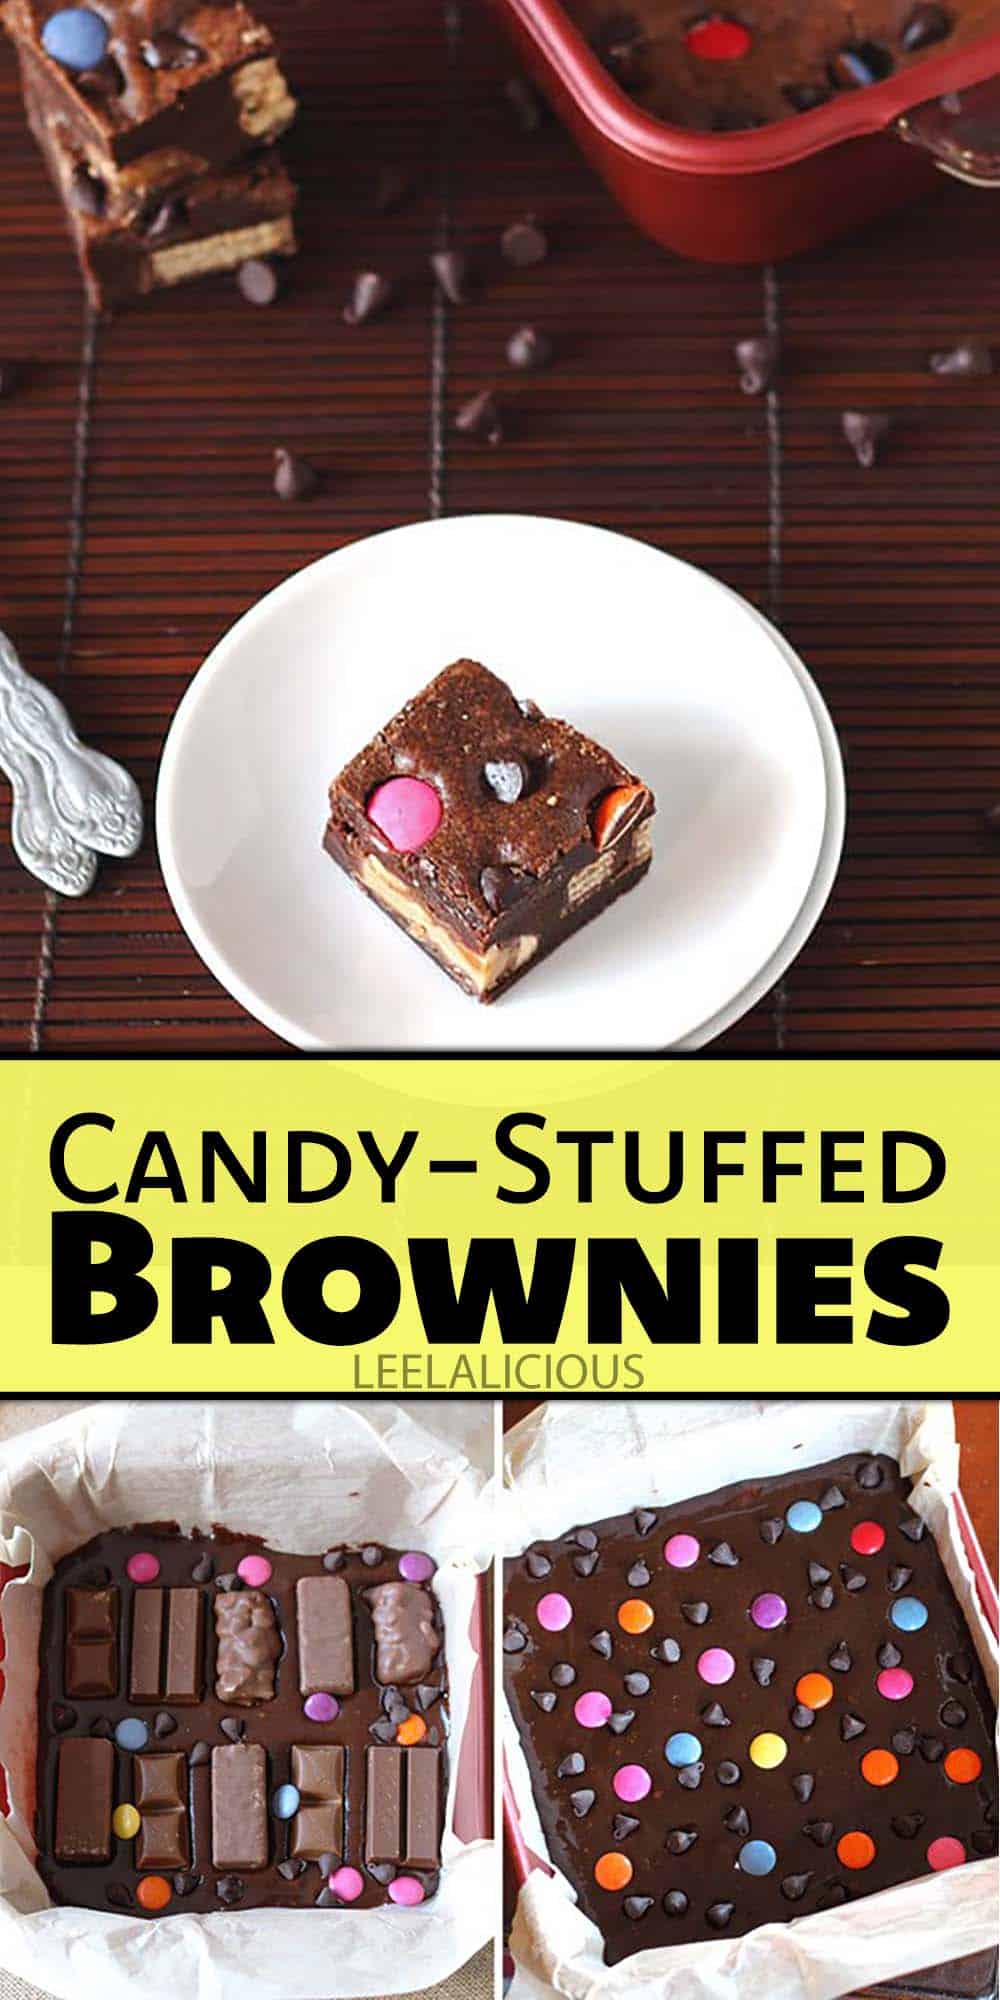 Leftover Candy-Stuffed Brownies